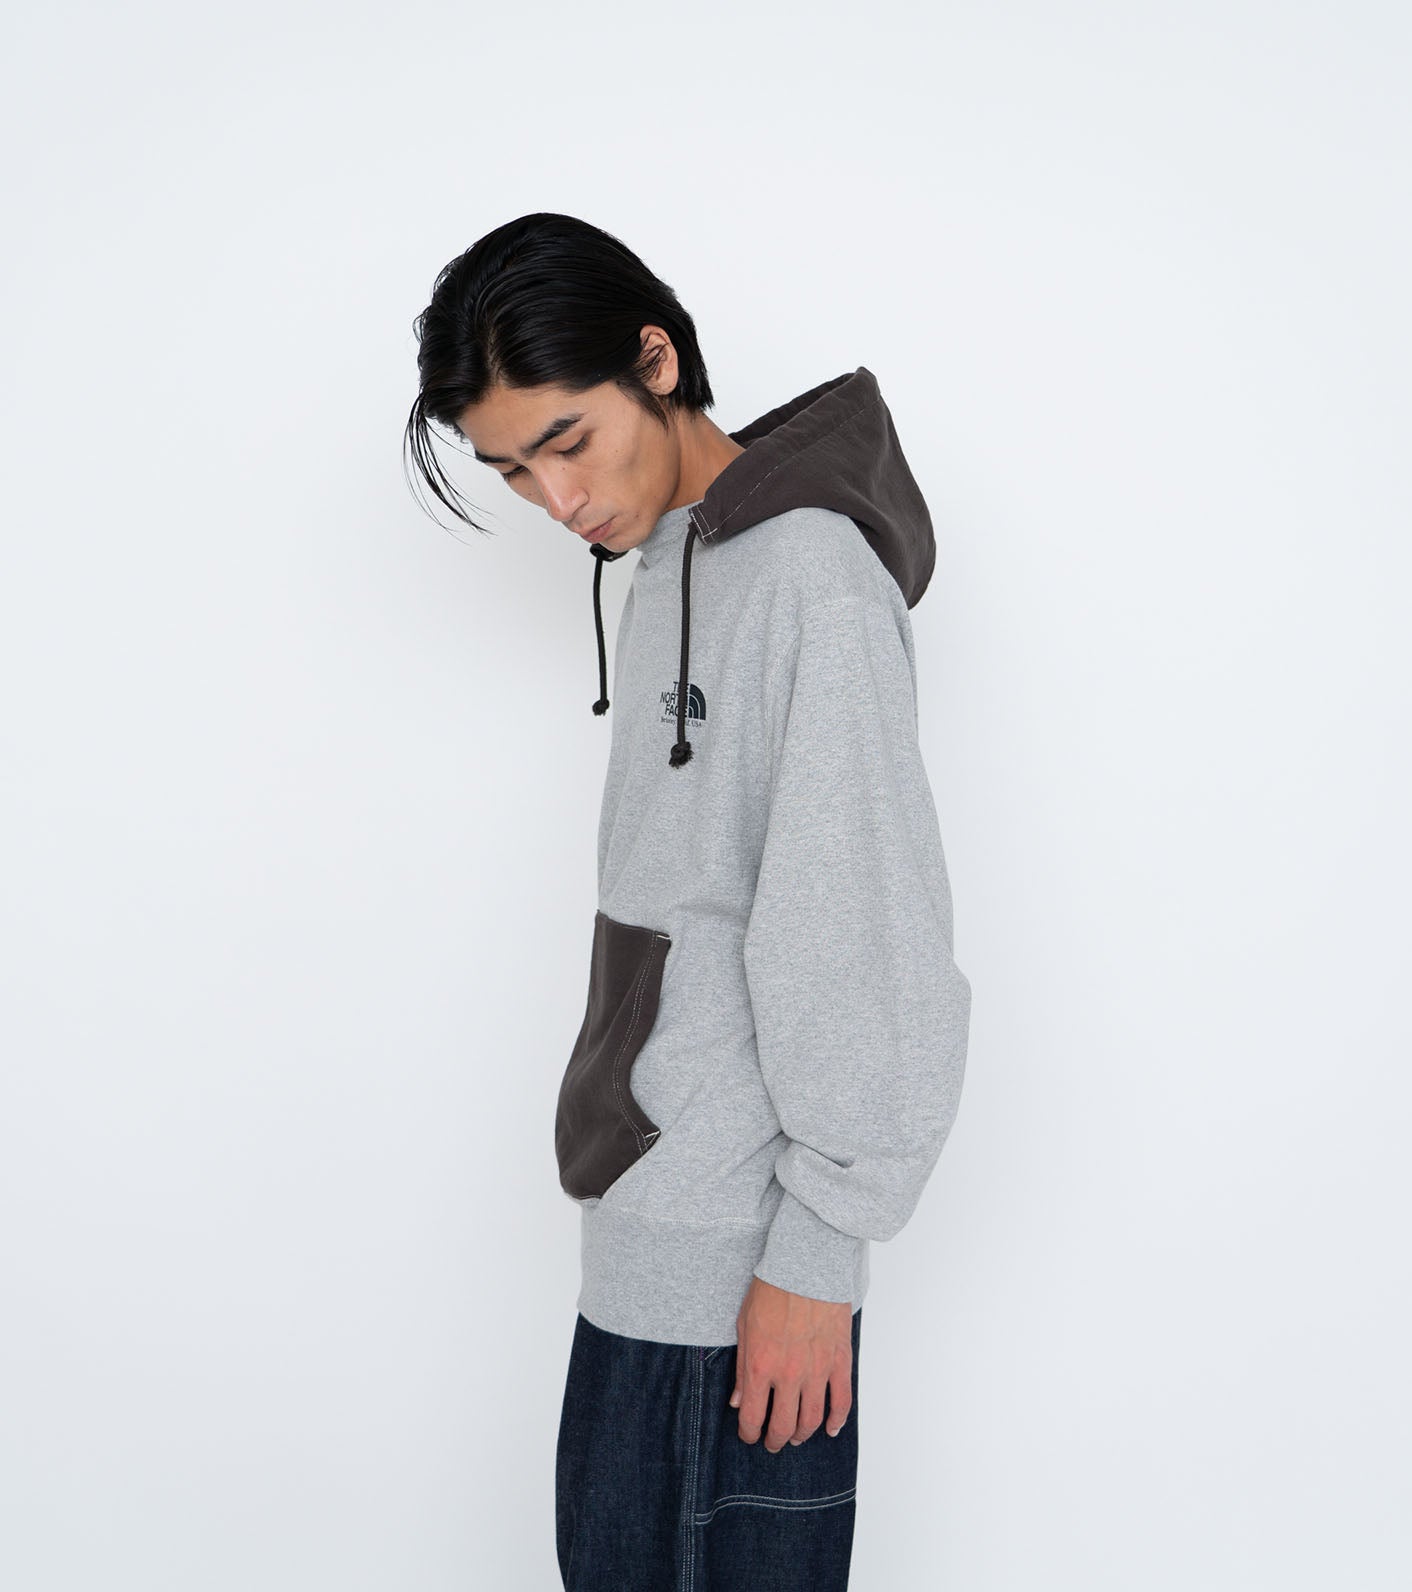 THE NORTH FACE PURPLE LABEL Field Graphic Hoodie